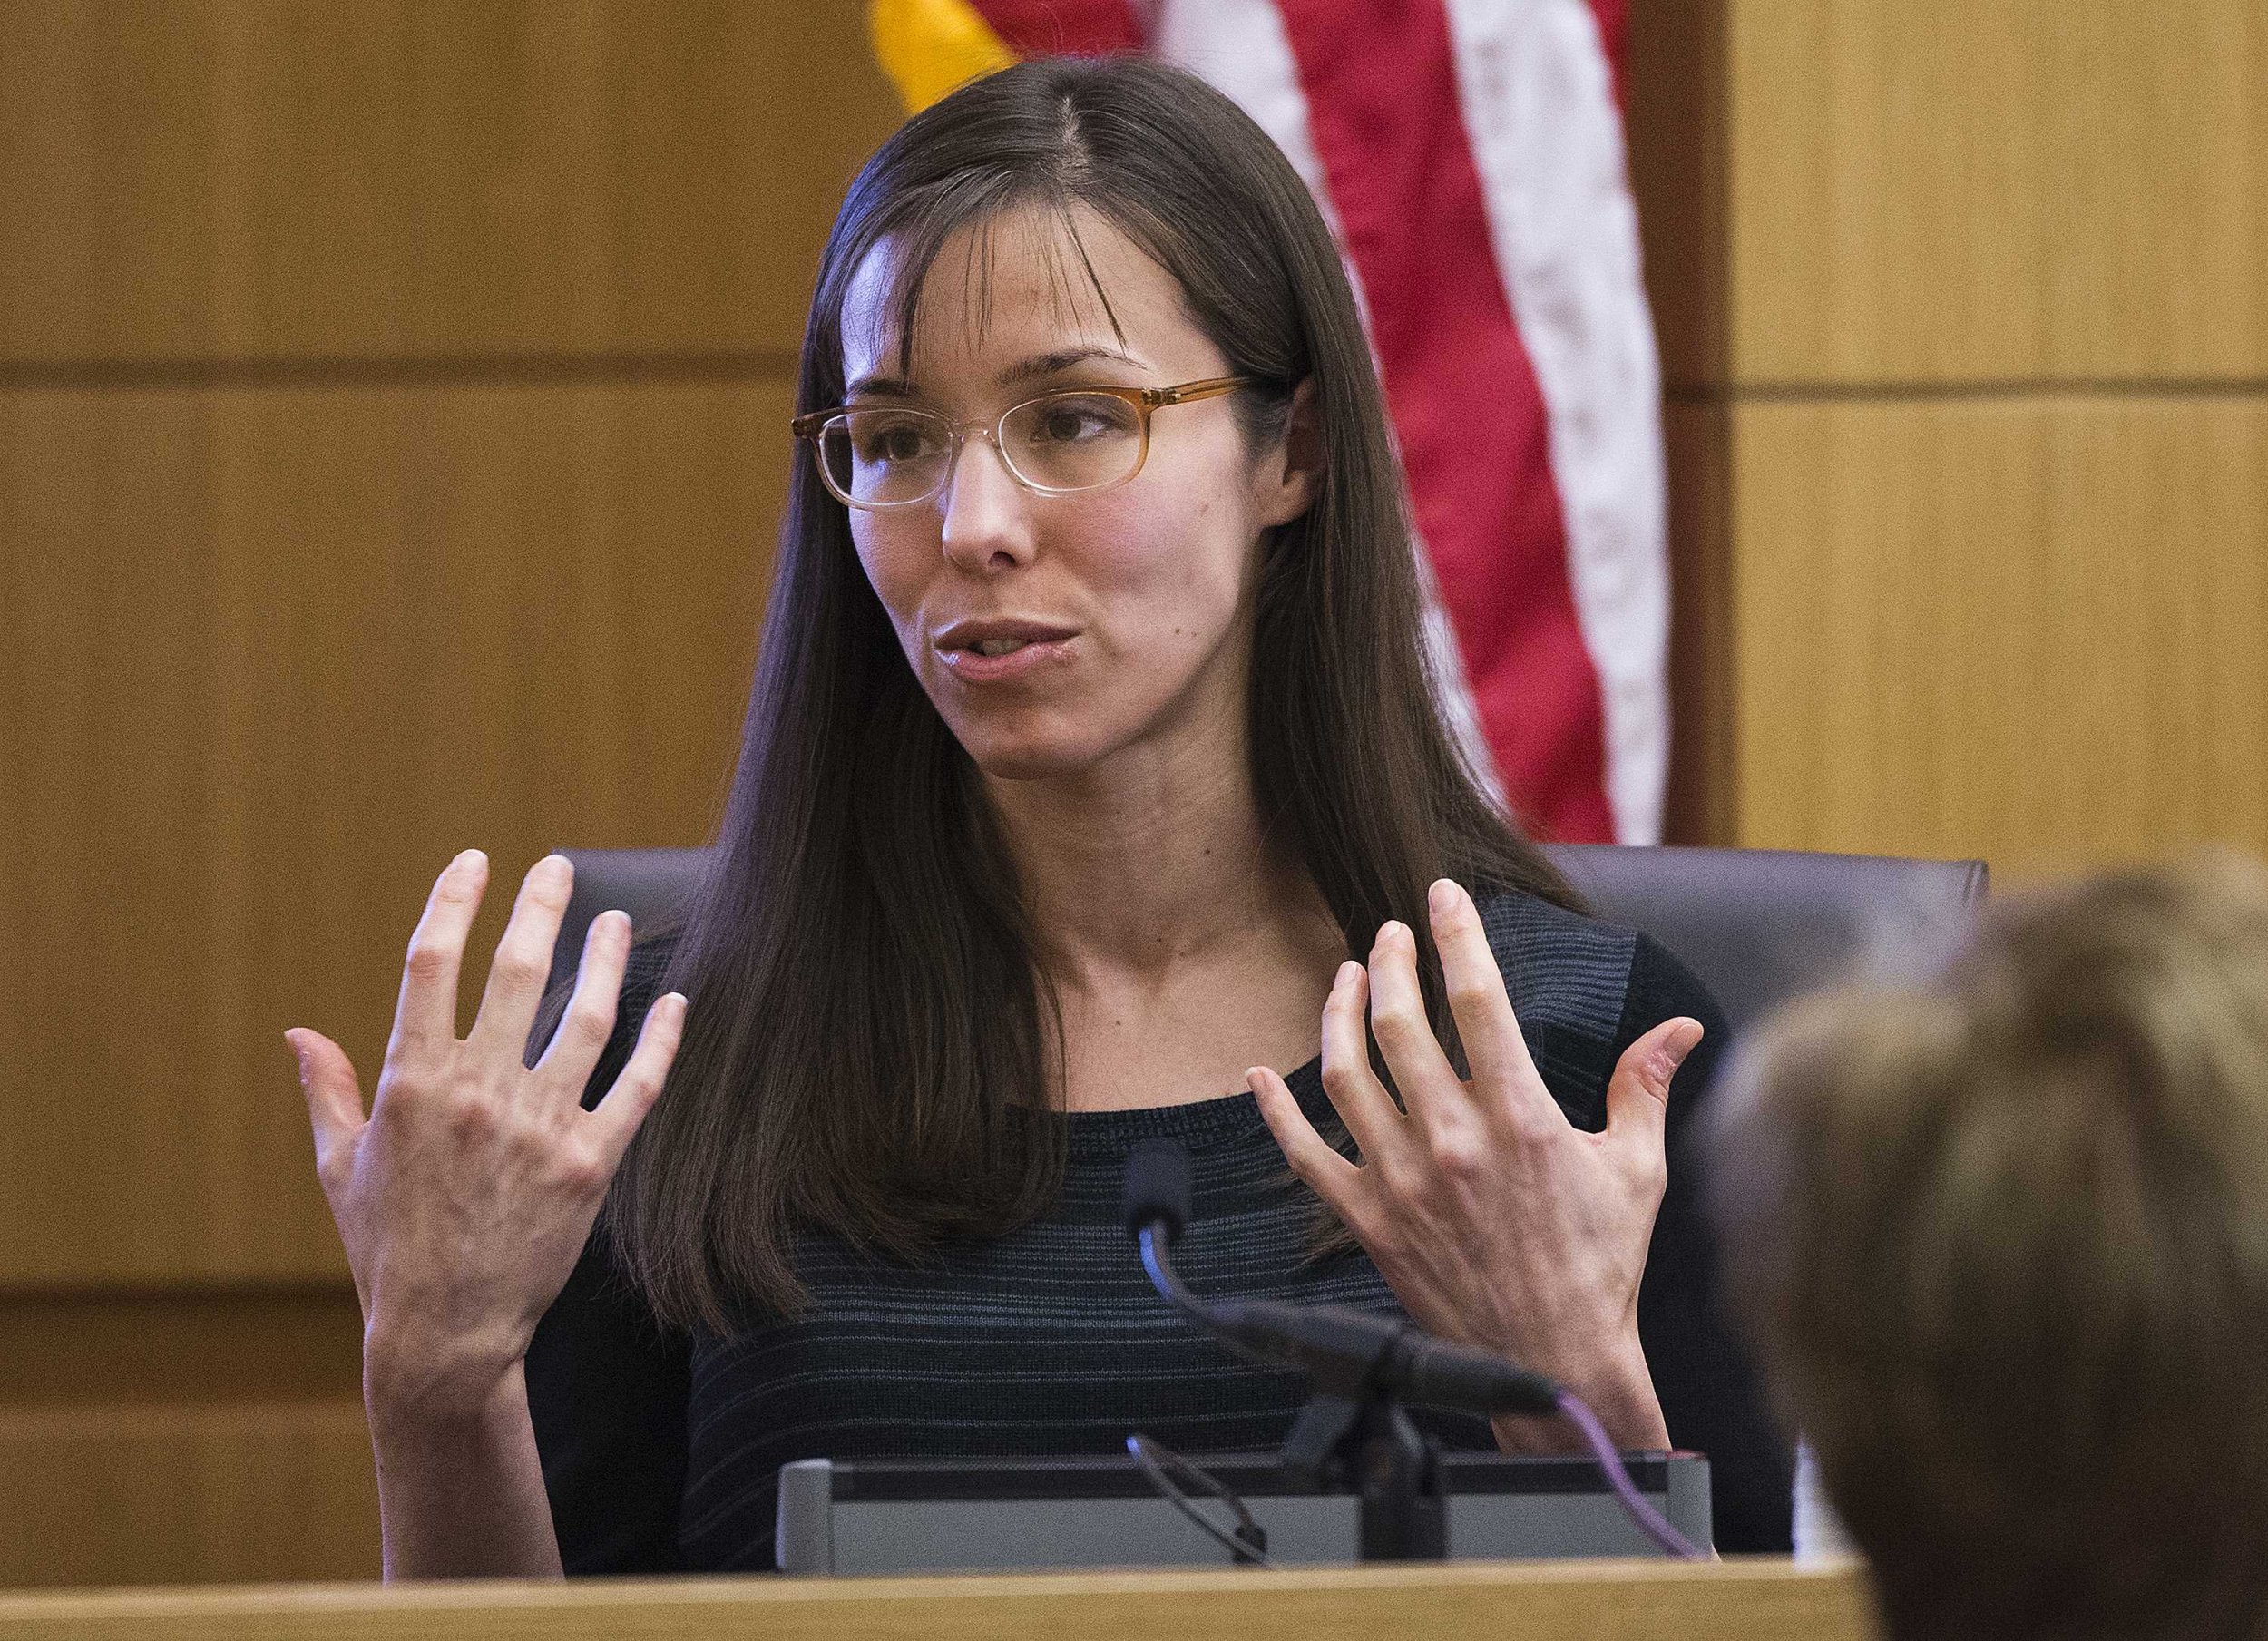 Jodi Arias Jailhouse Interview Watch Arias Beg For Life As Jury Decides Her Fate Video